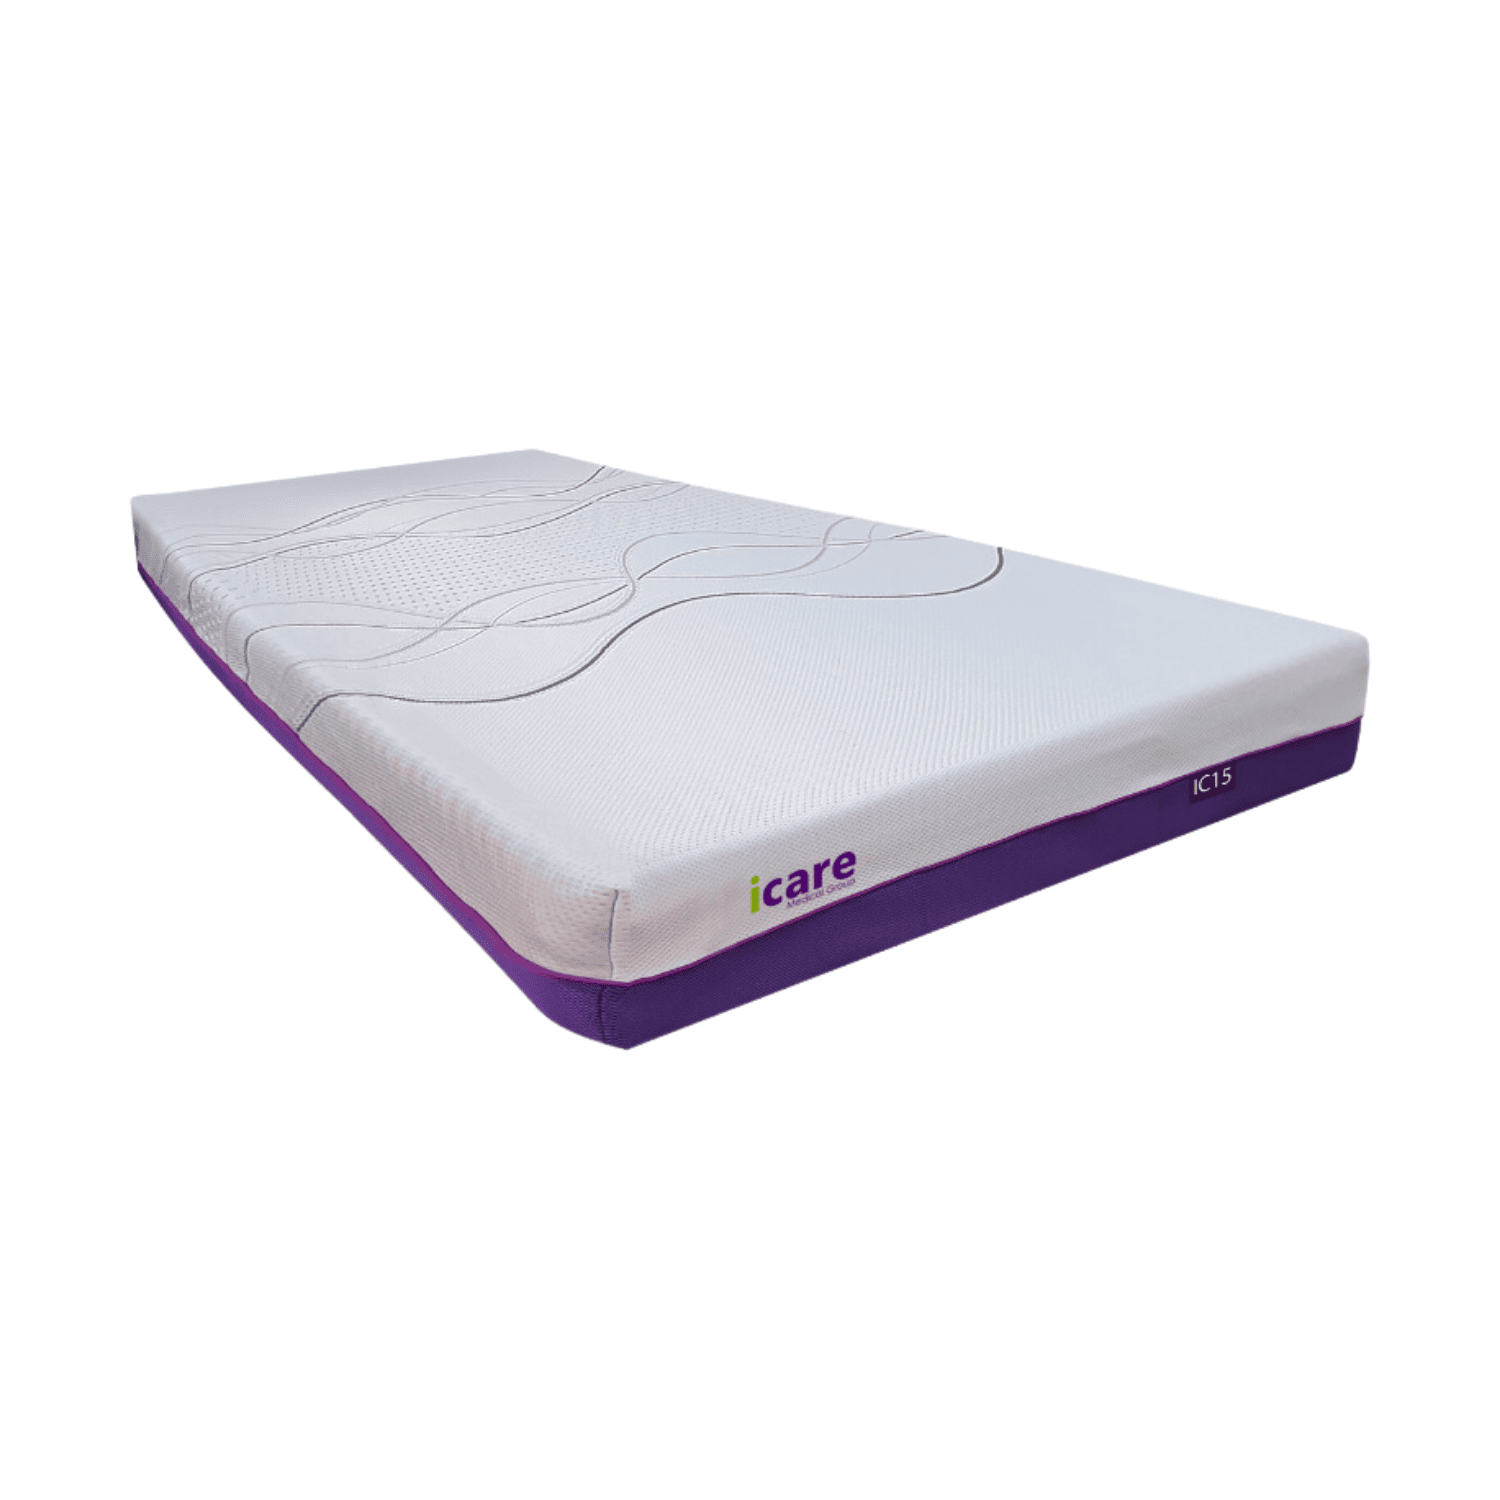 iCare Firm IC15 Mattress